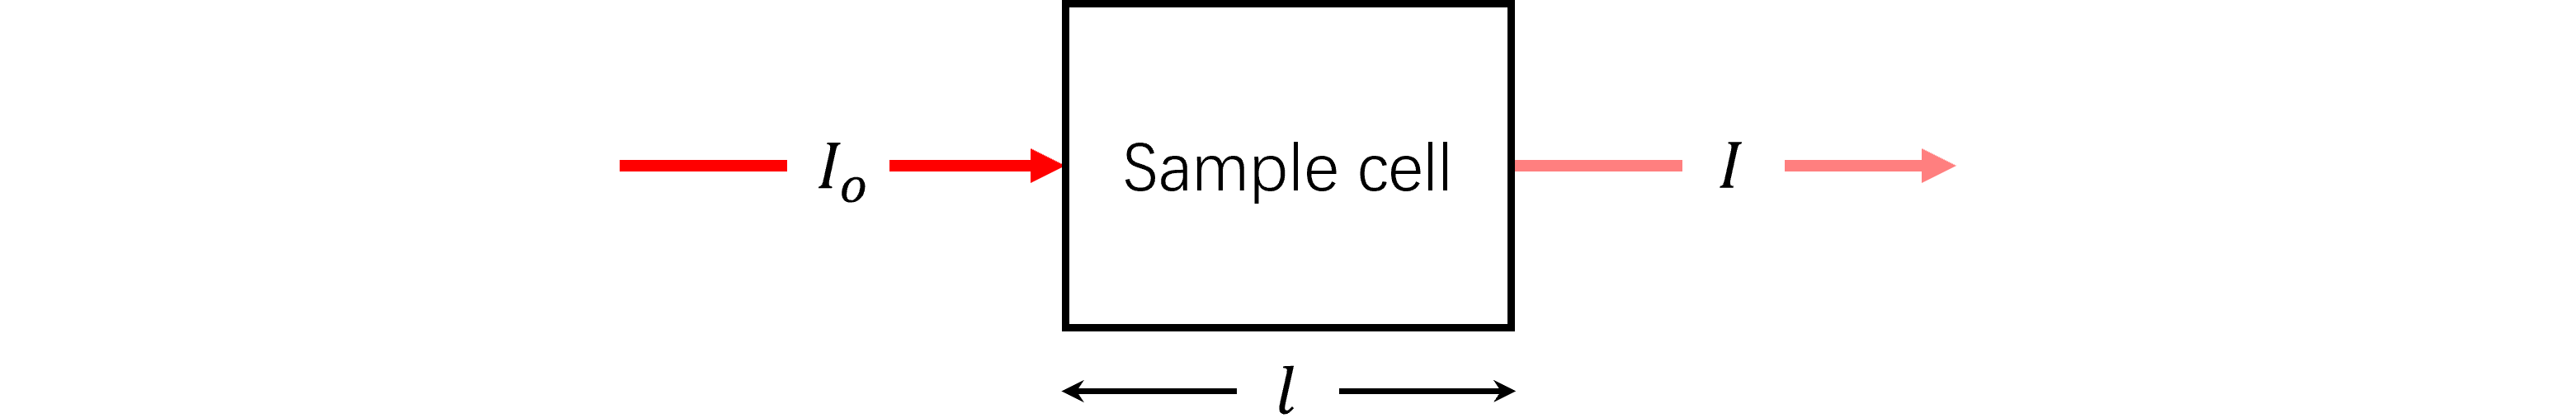 Simple Illustration of a Sample Cell